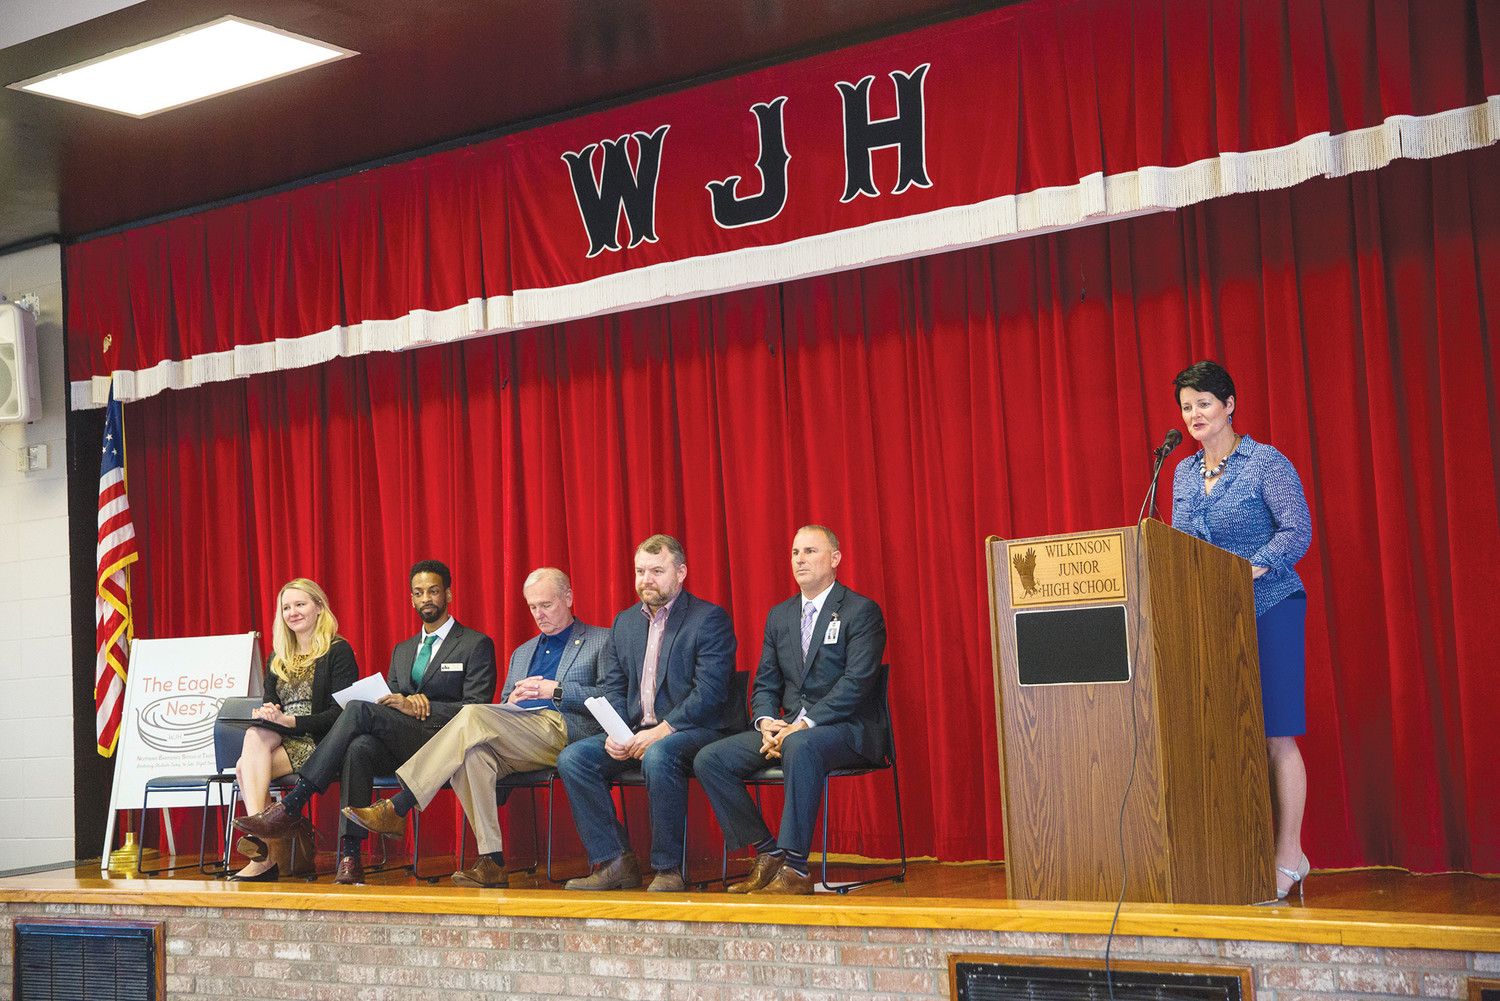 Wilkinson Junior High School Principal Christina Cornwell introduces speakers last week at the school during an announcement that Wilkinson will be the first state-funded Community Partnership School in Clay County.